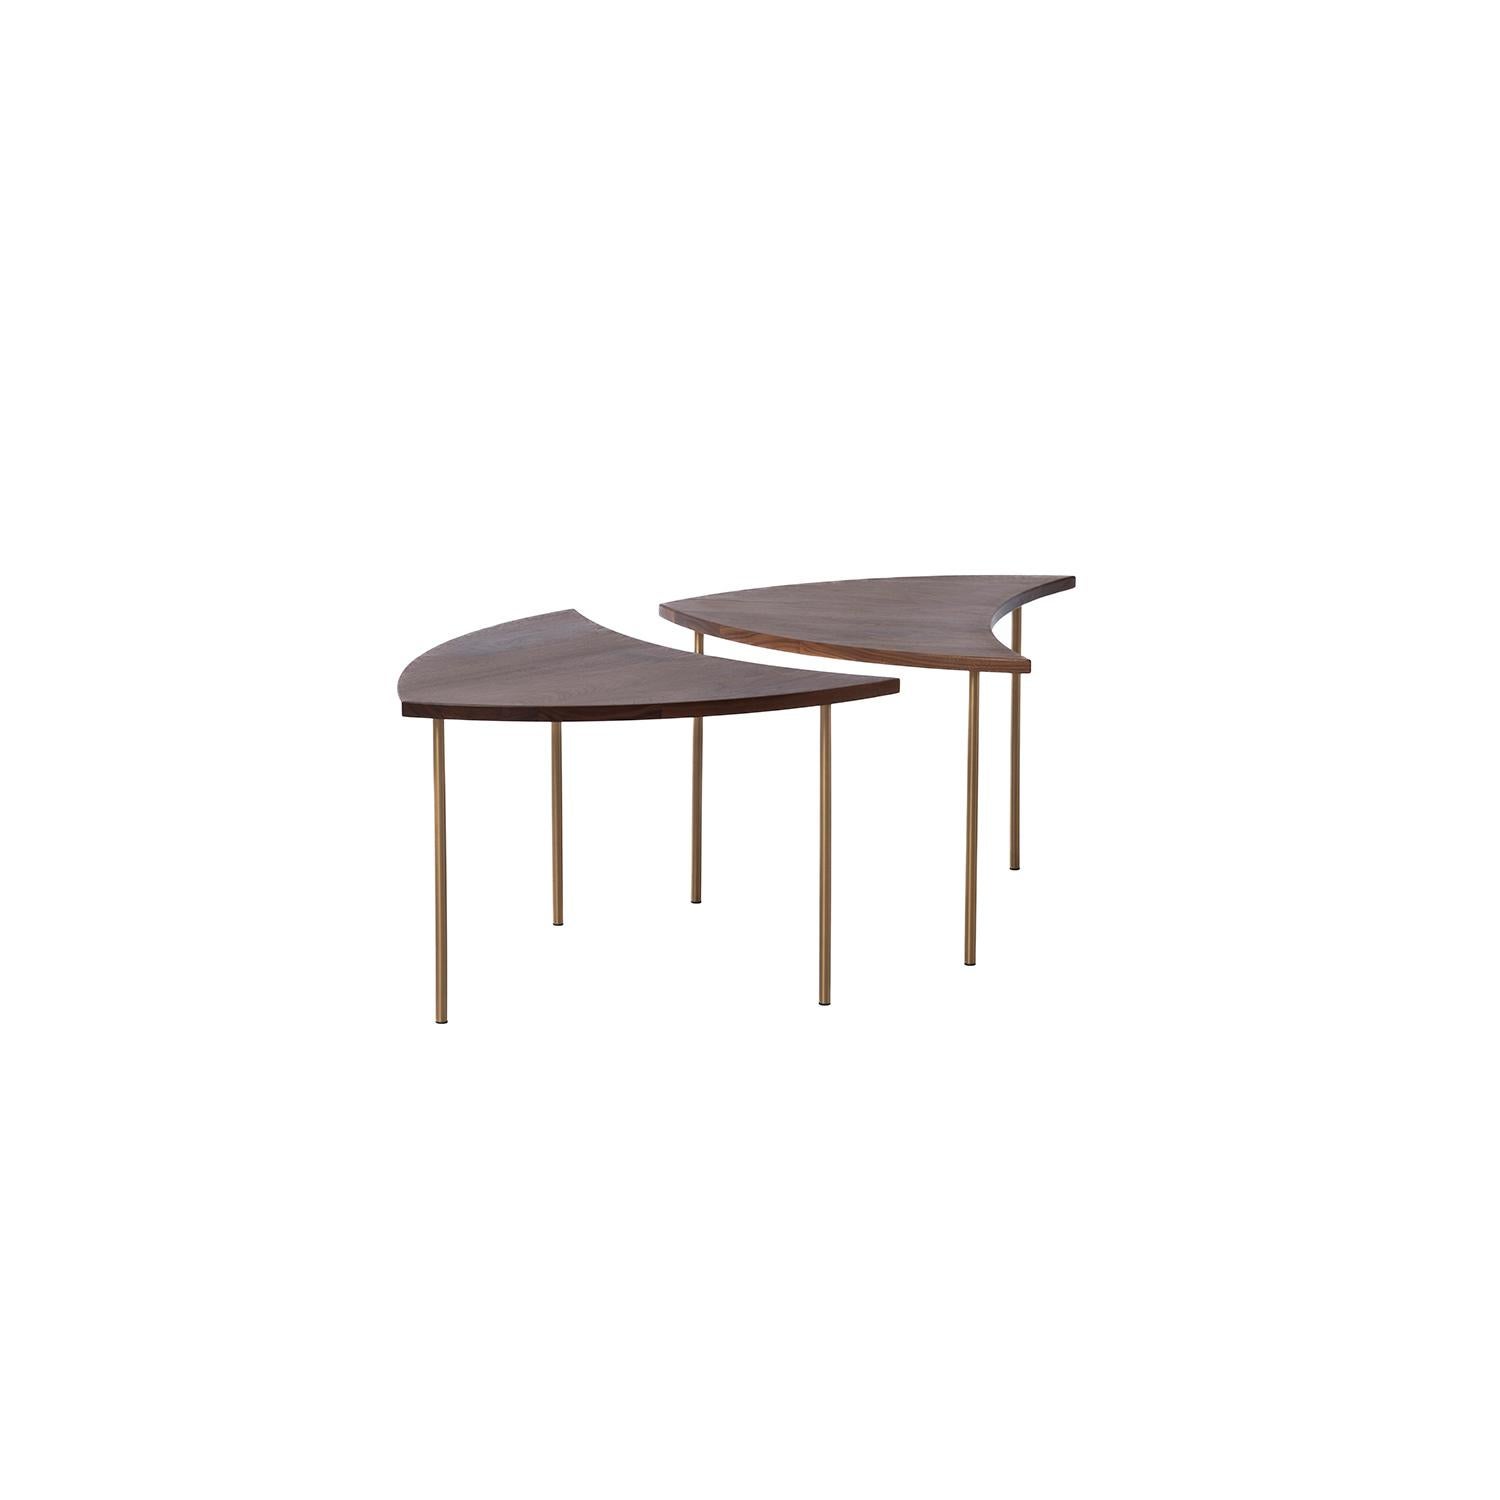 Peter Hvidt & Orla Molgaard-Nielsen designed adaptable occasional pin wheel tables. Newly manufactured in an oiled walnut. Six tables available. Price is per table.
 
Professional, skilled furniture restoration is an integral part of what we do